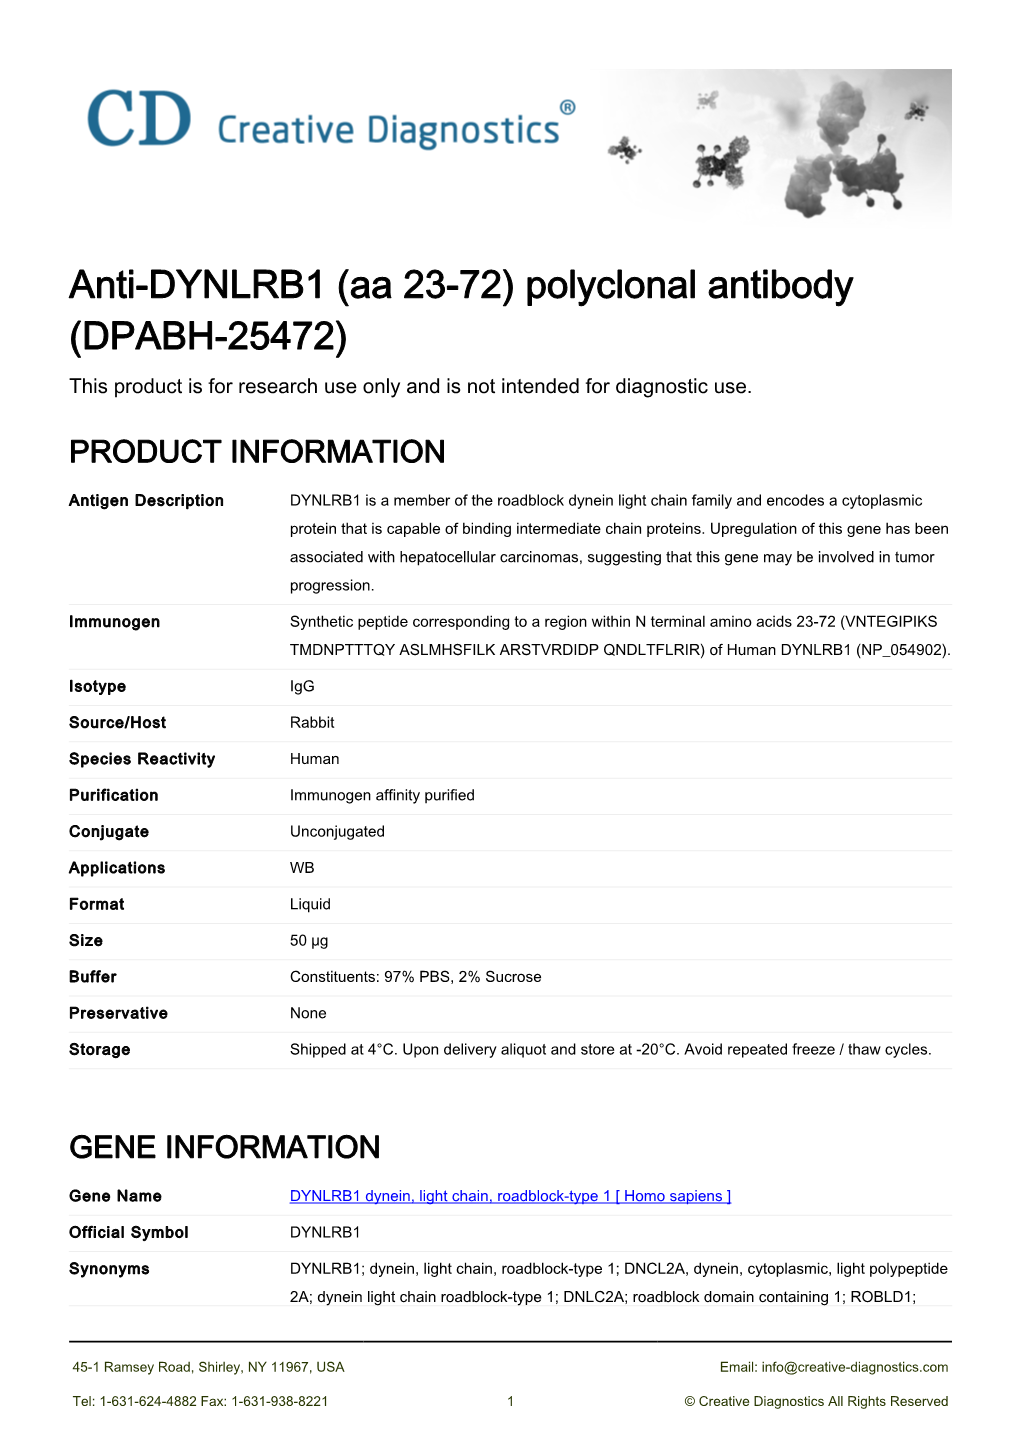 Anti-DYNLRB1 (Aa 23-72) Polyclonal Antibody (DPABH-25472) This Product Is for Research Use Only and Is Not Intended for Diagnostic Use